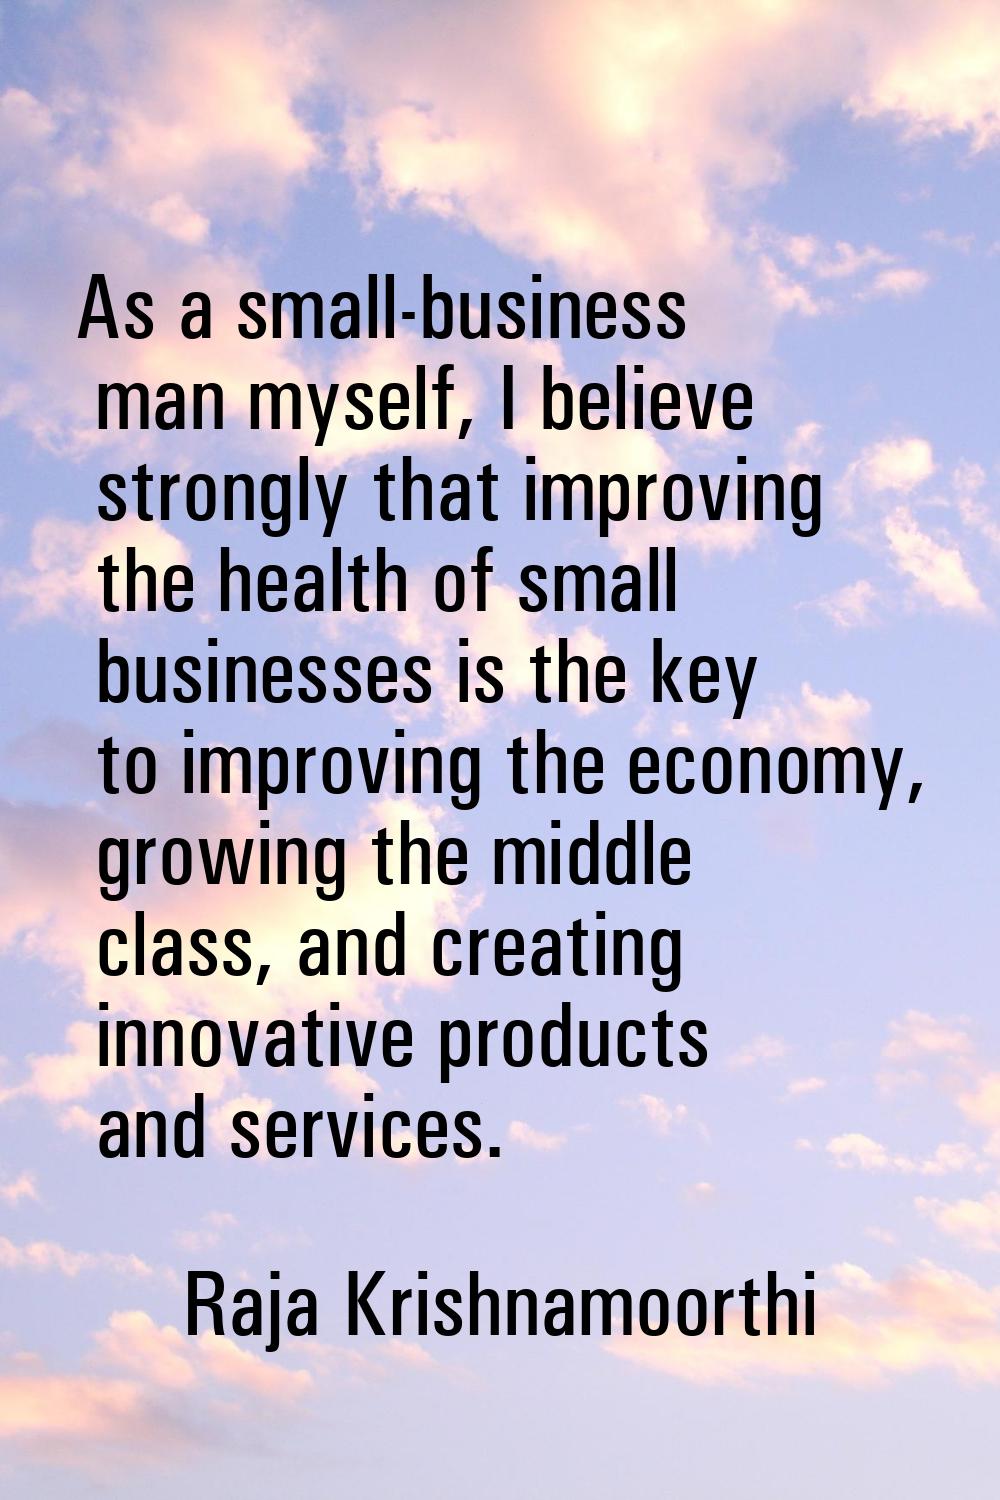 As a small-business man myself, I believe strongly that improving the health of small businesses is